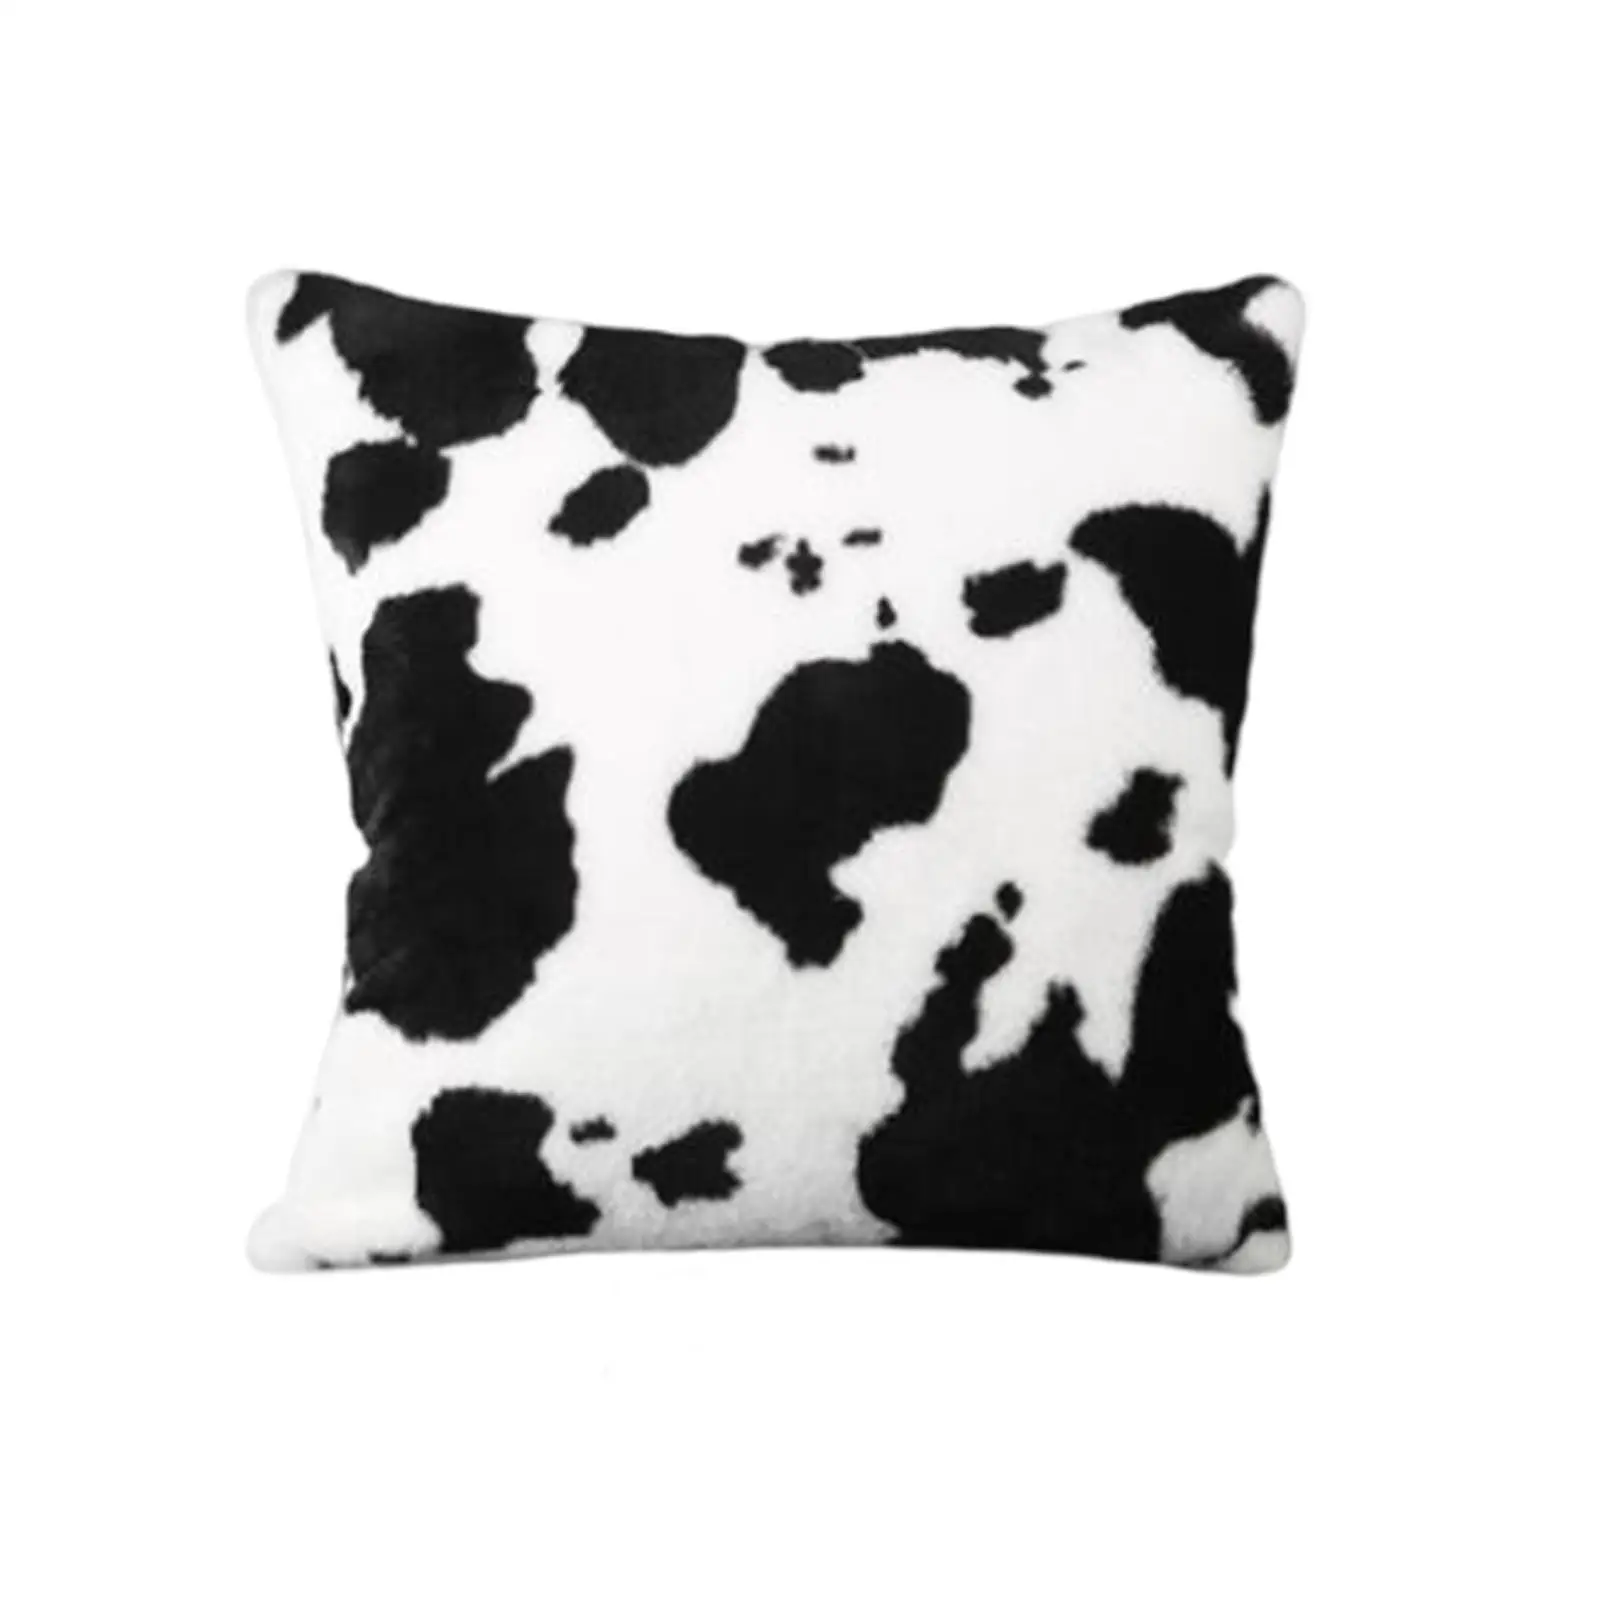 Cow Pattern Printed 18x18 Inches Pillowcase Cushion Cover for Sofa Couch Short Plush Material Square Shop Decoration Soft